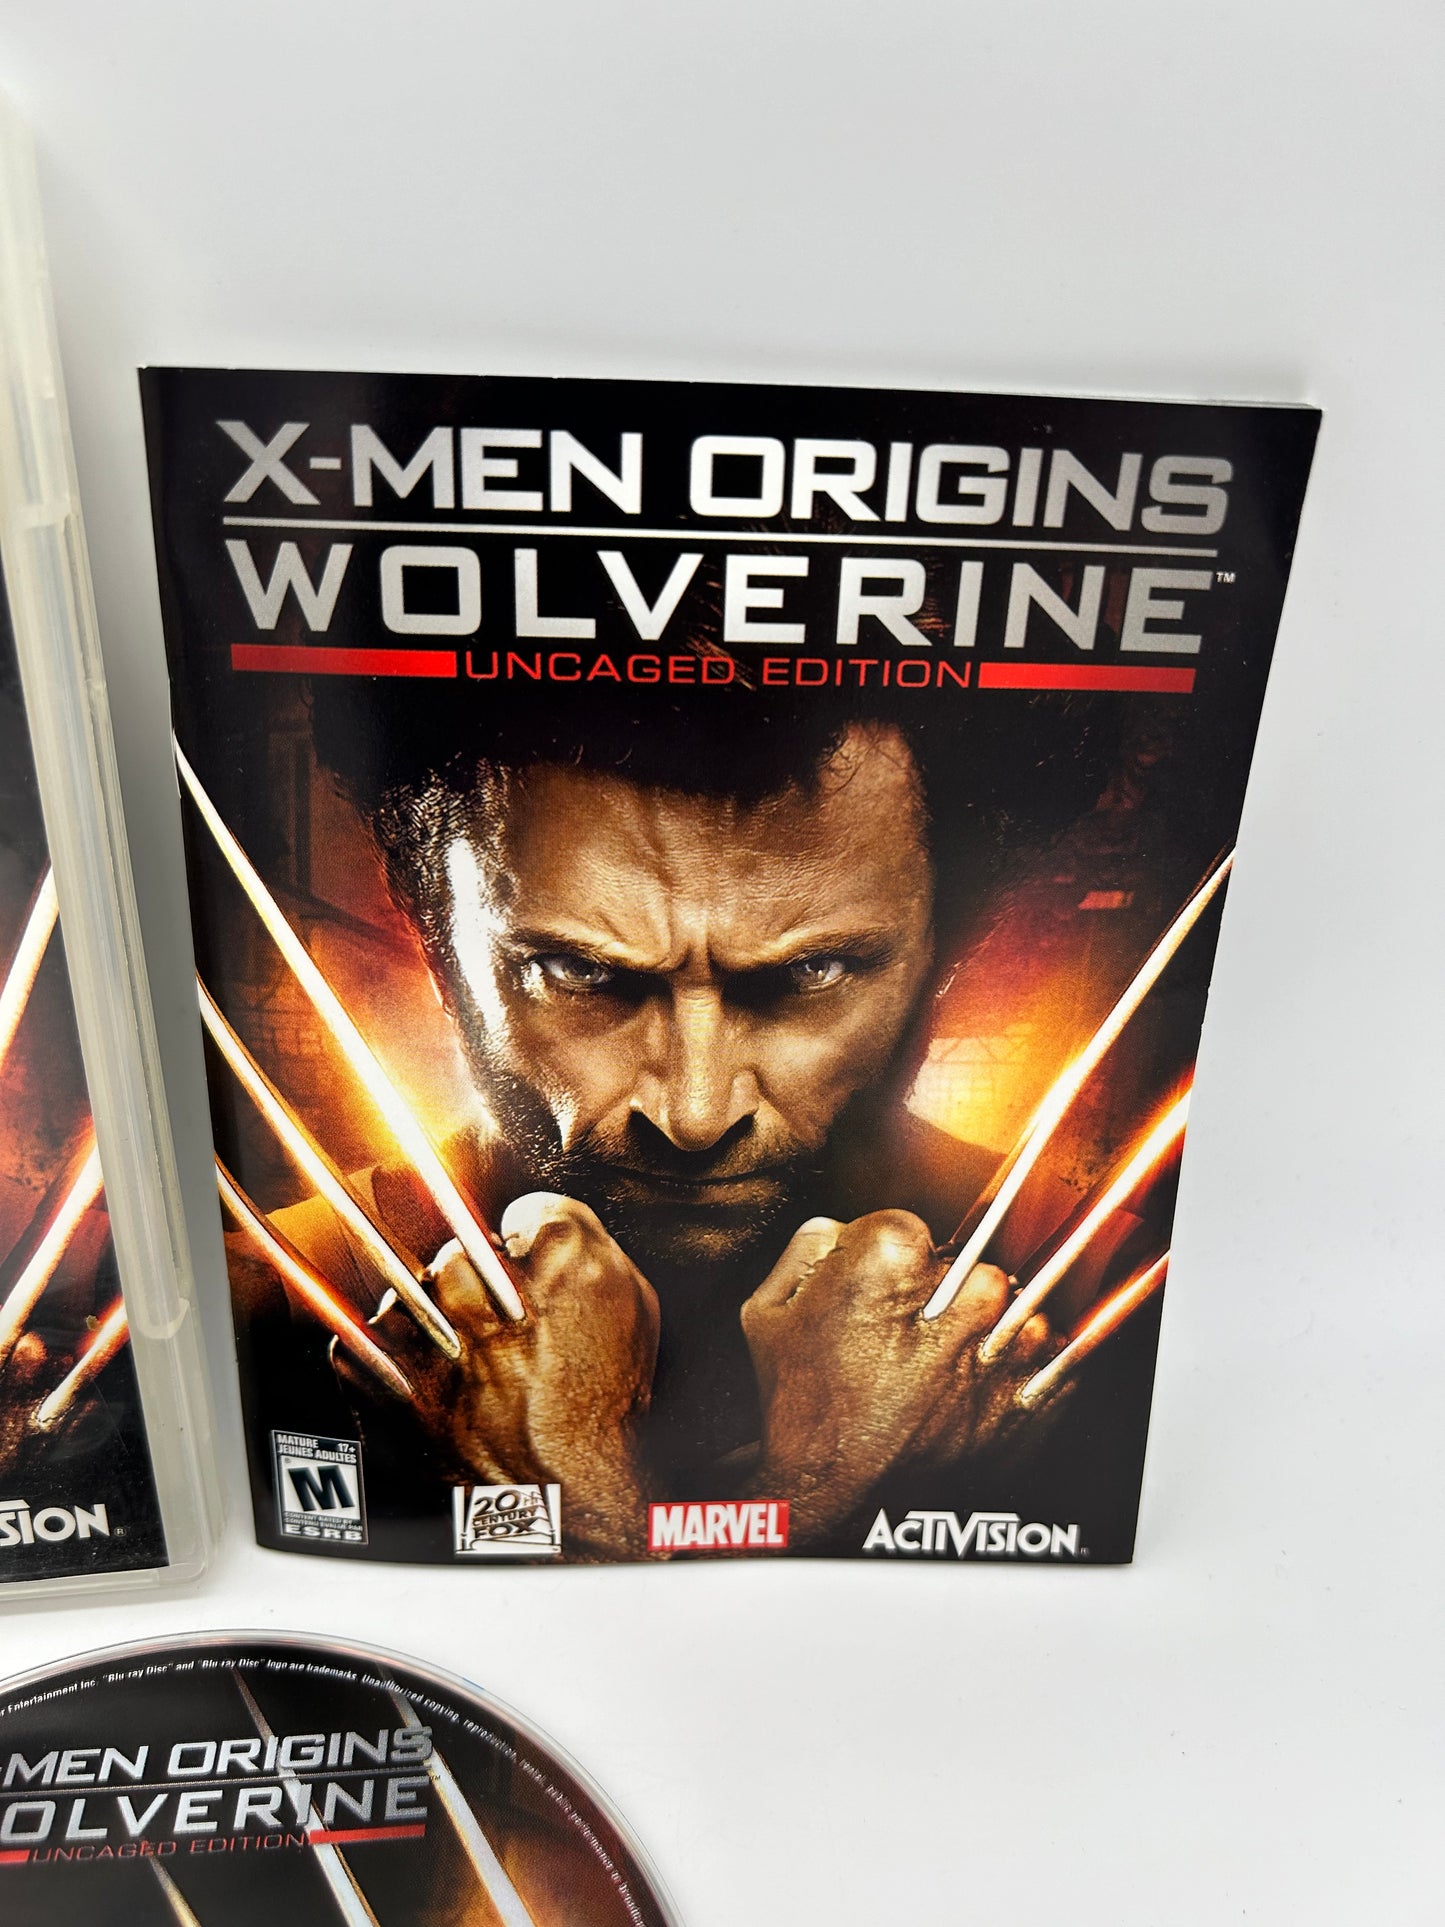 SONY PLAYSTATiON 3 [PS3] | X-MEN ORiGiNS WOLVERiNE | UNCAGED EDiTiON